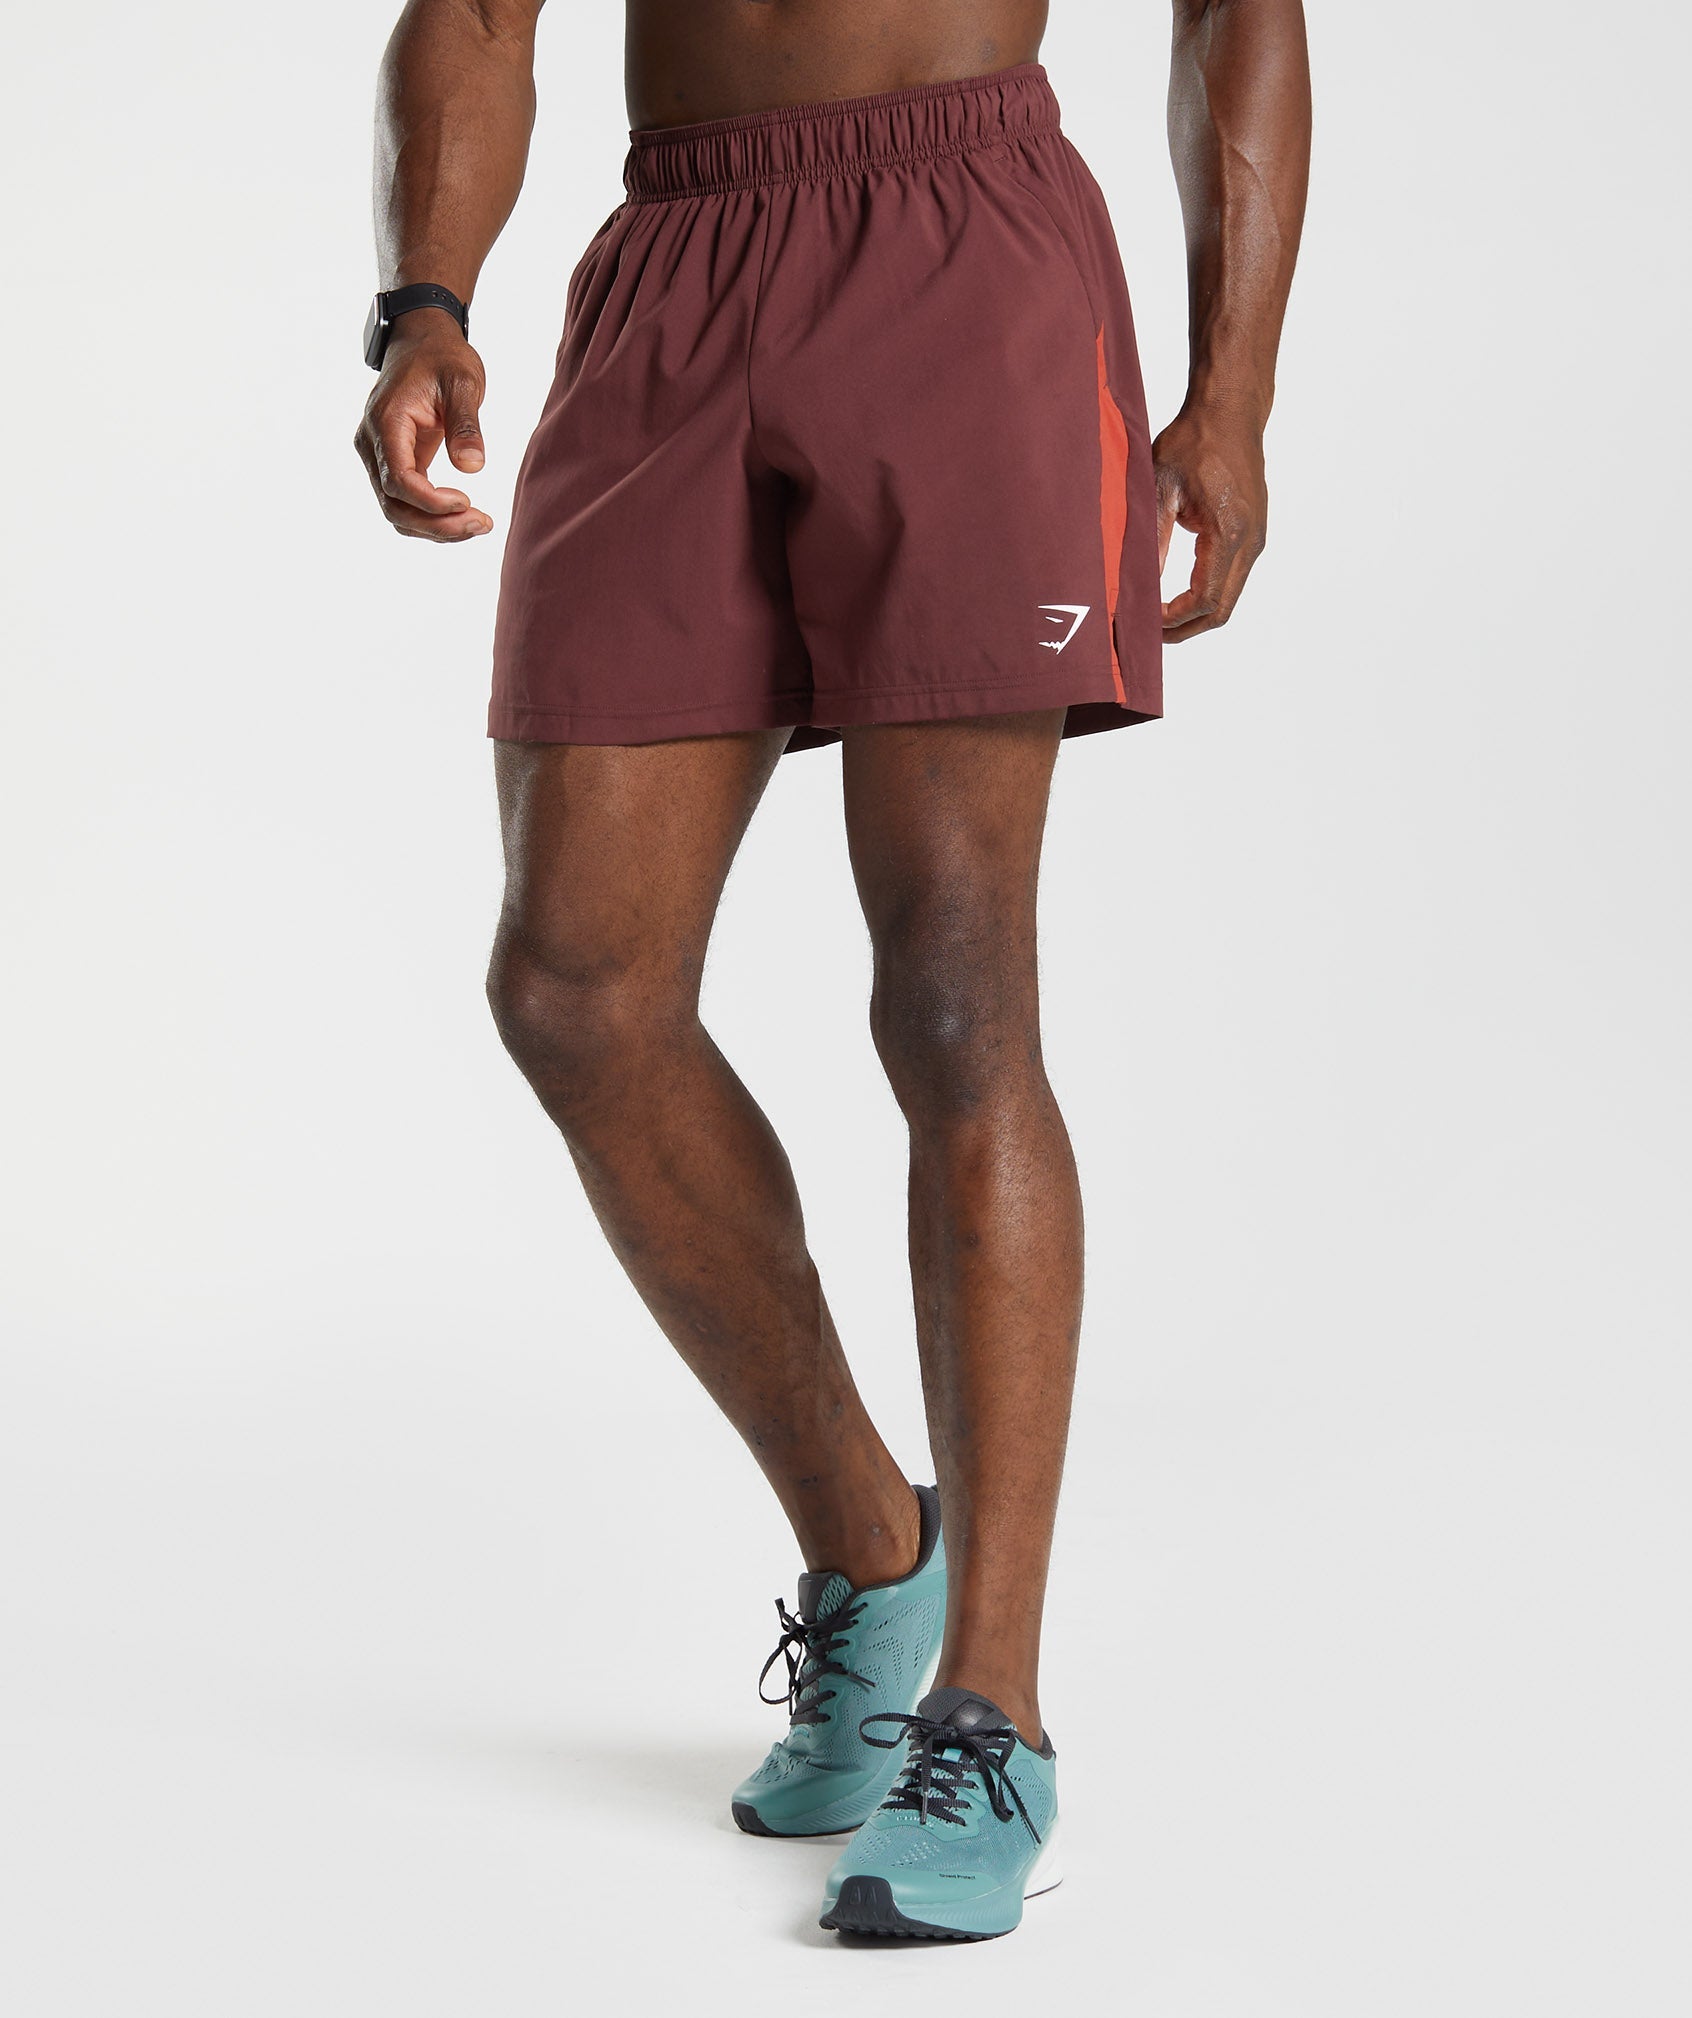 Sport 7" Shorts in Baked Maroon/Salsa Red